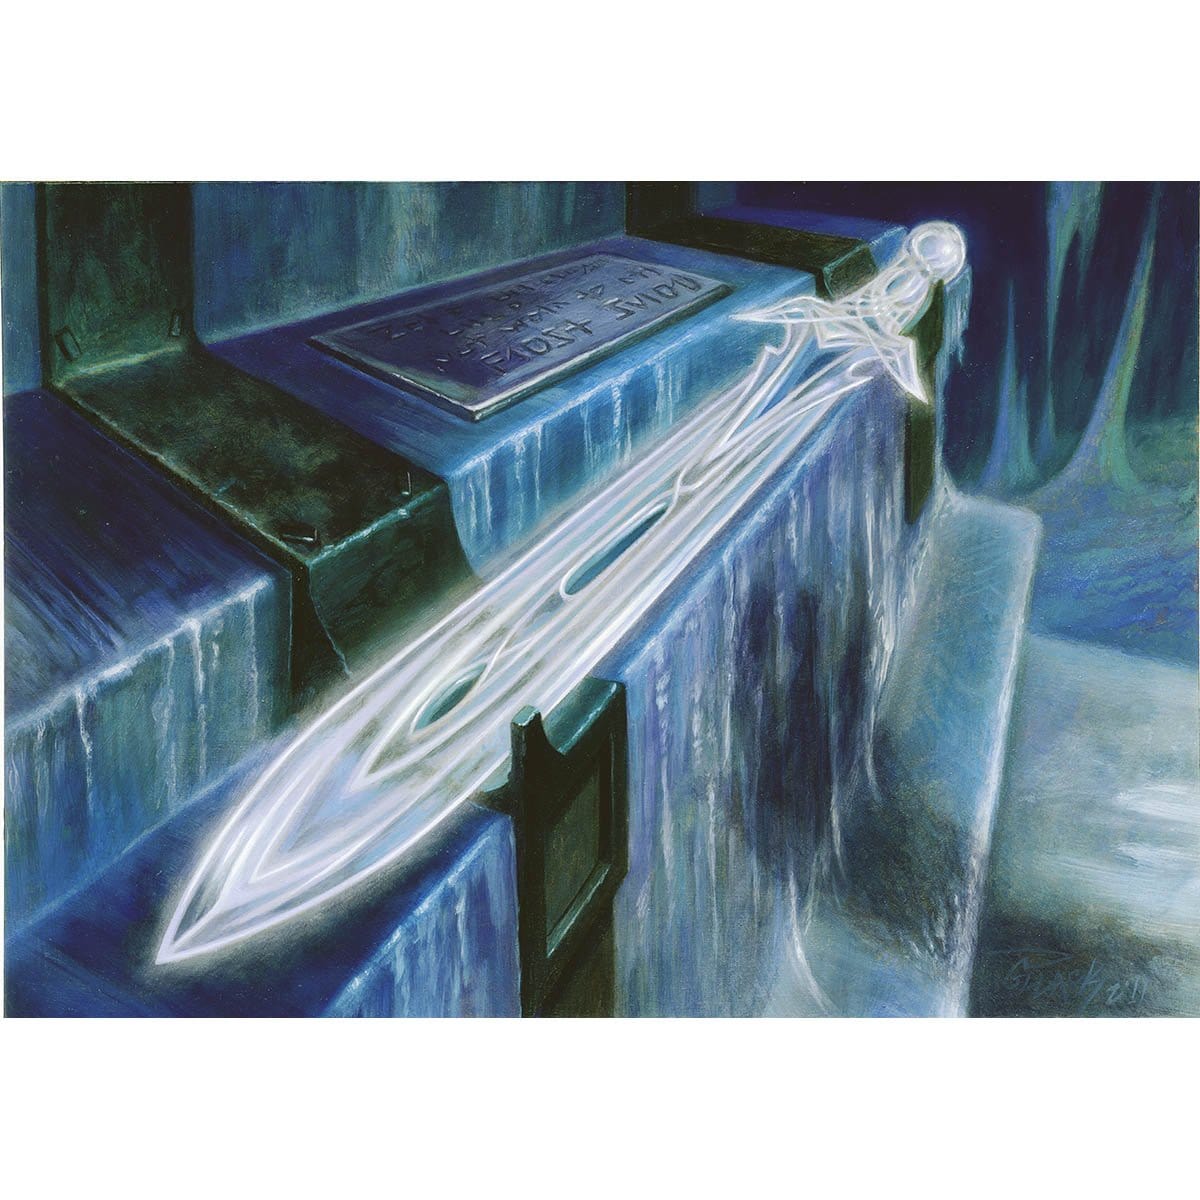 Blade of Selves Print - Print - Original Magic Art - Accessories for Magic the Gathering and other card games